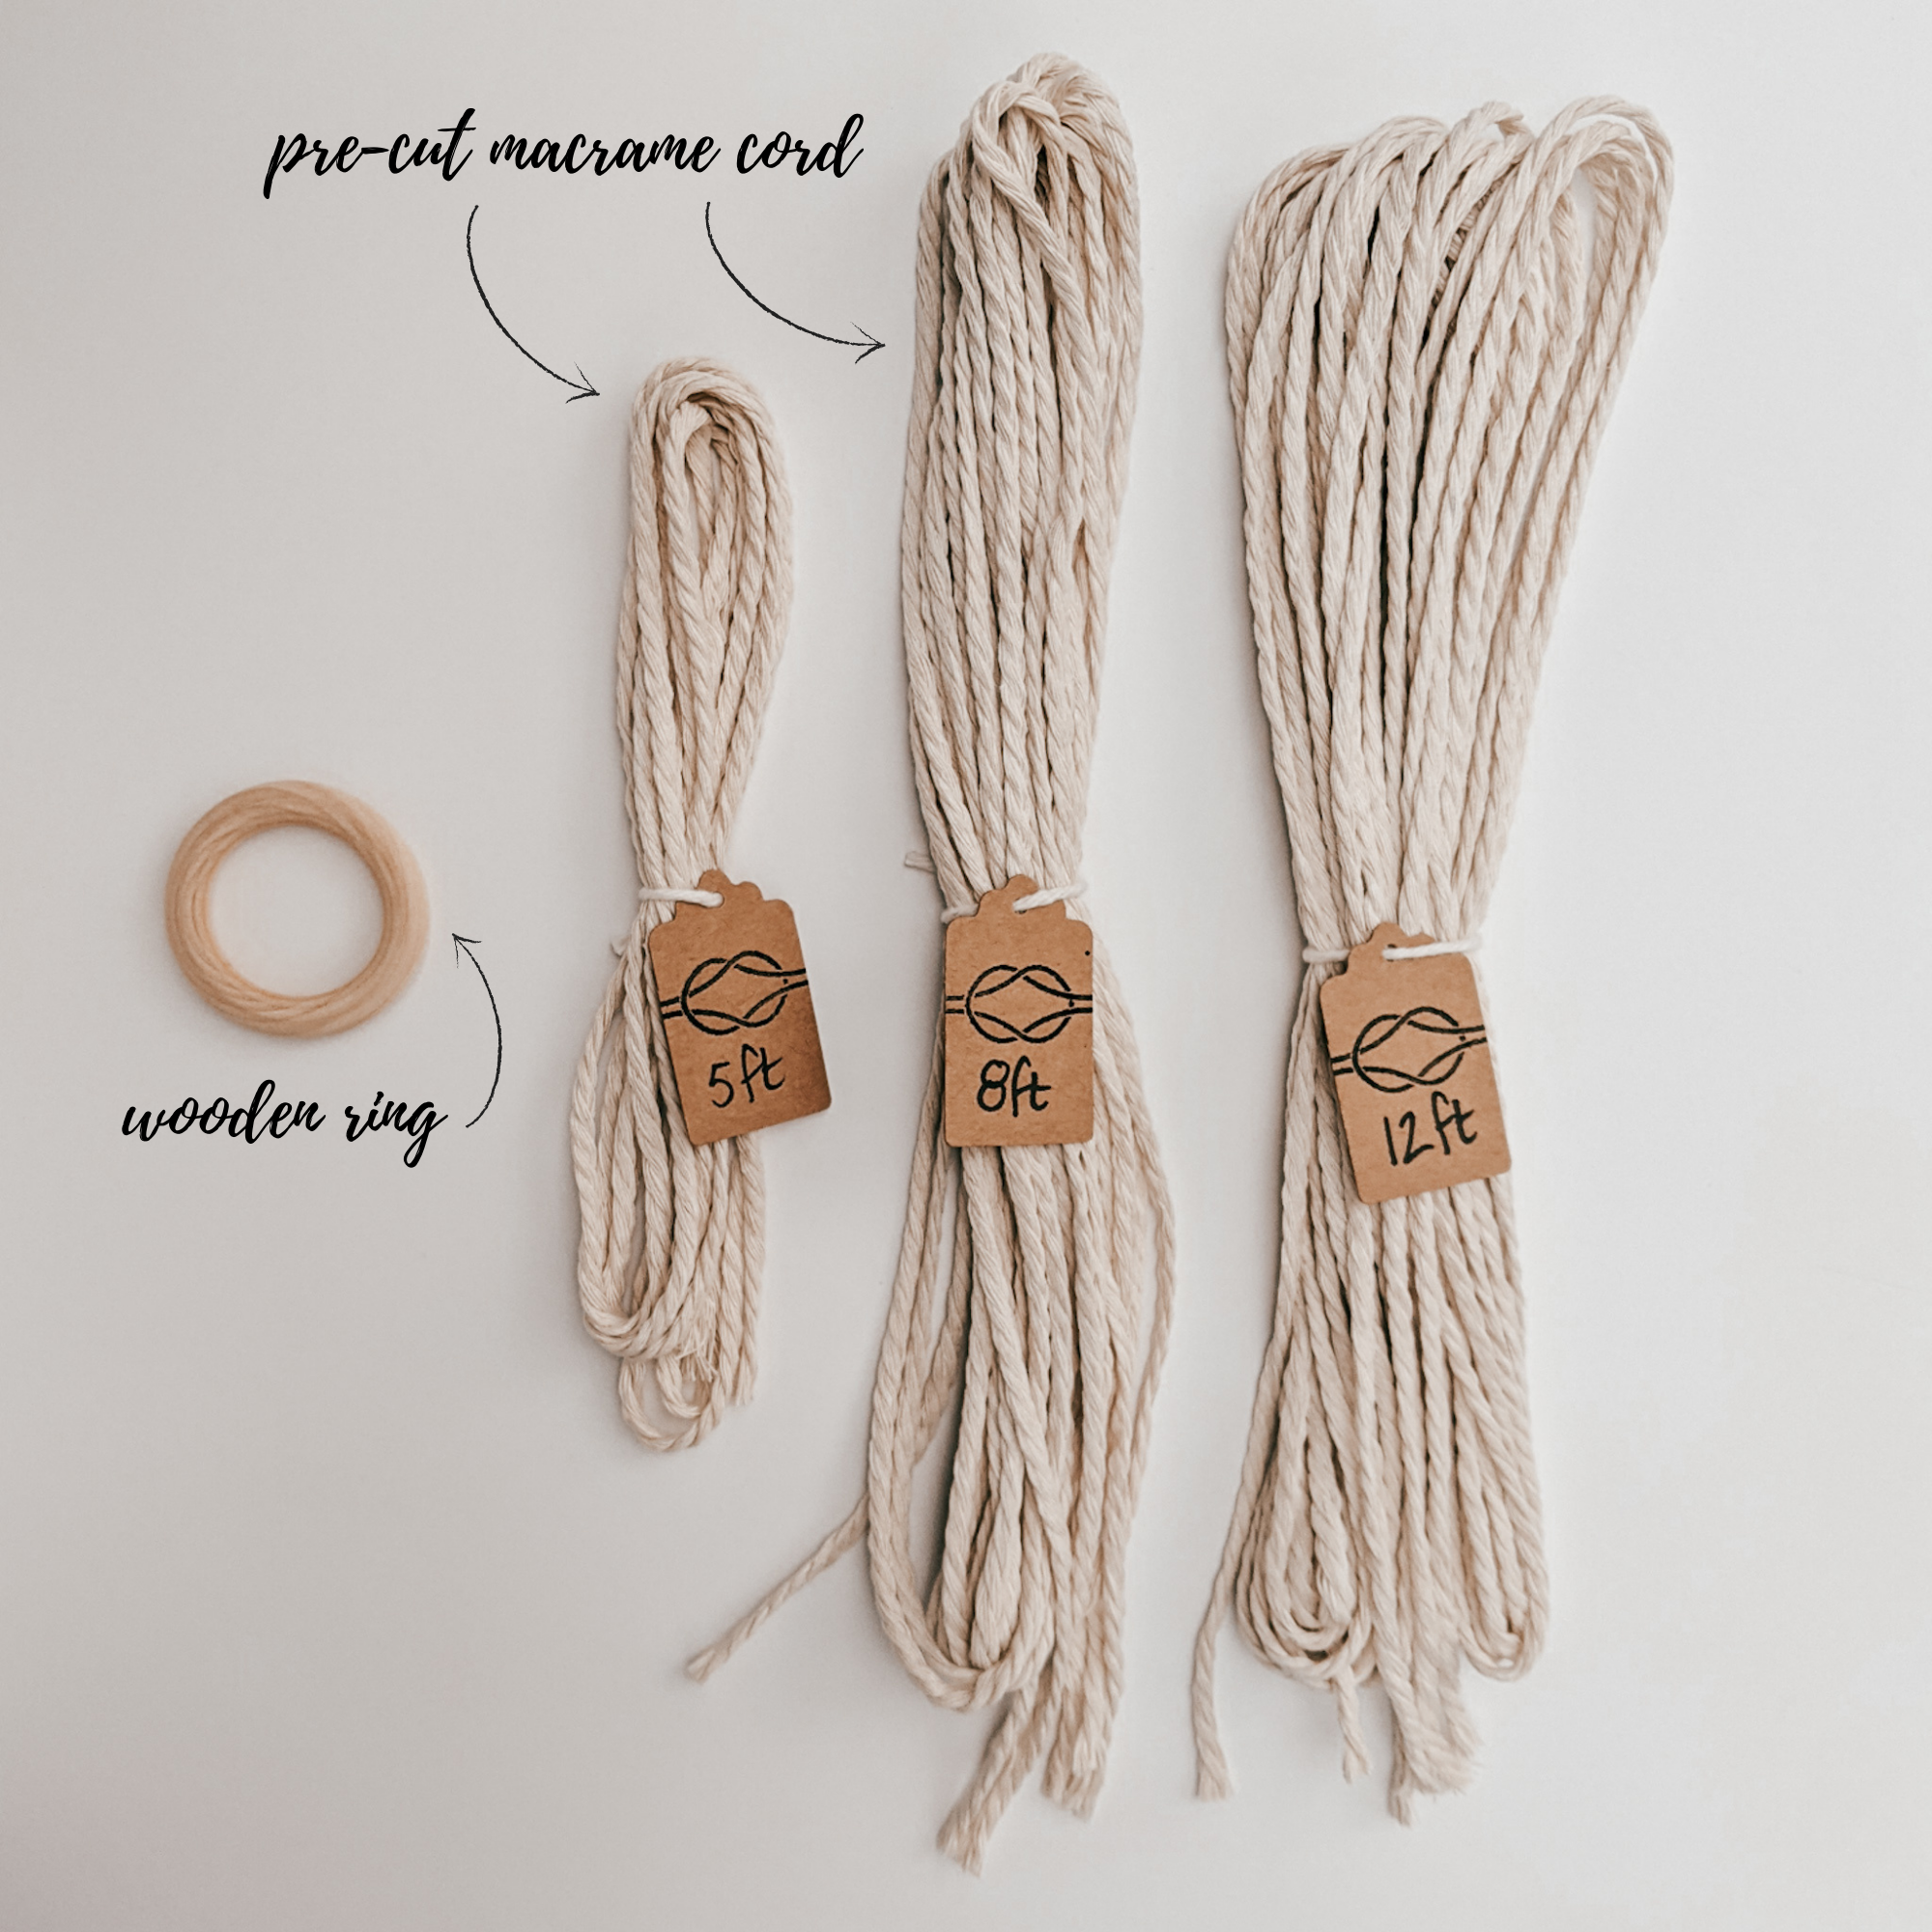 Boho Macrame Plant Hanger Kit components. Kit includes wooden ring and pre-cut macrame cord